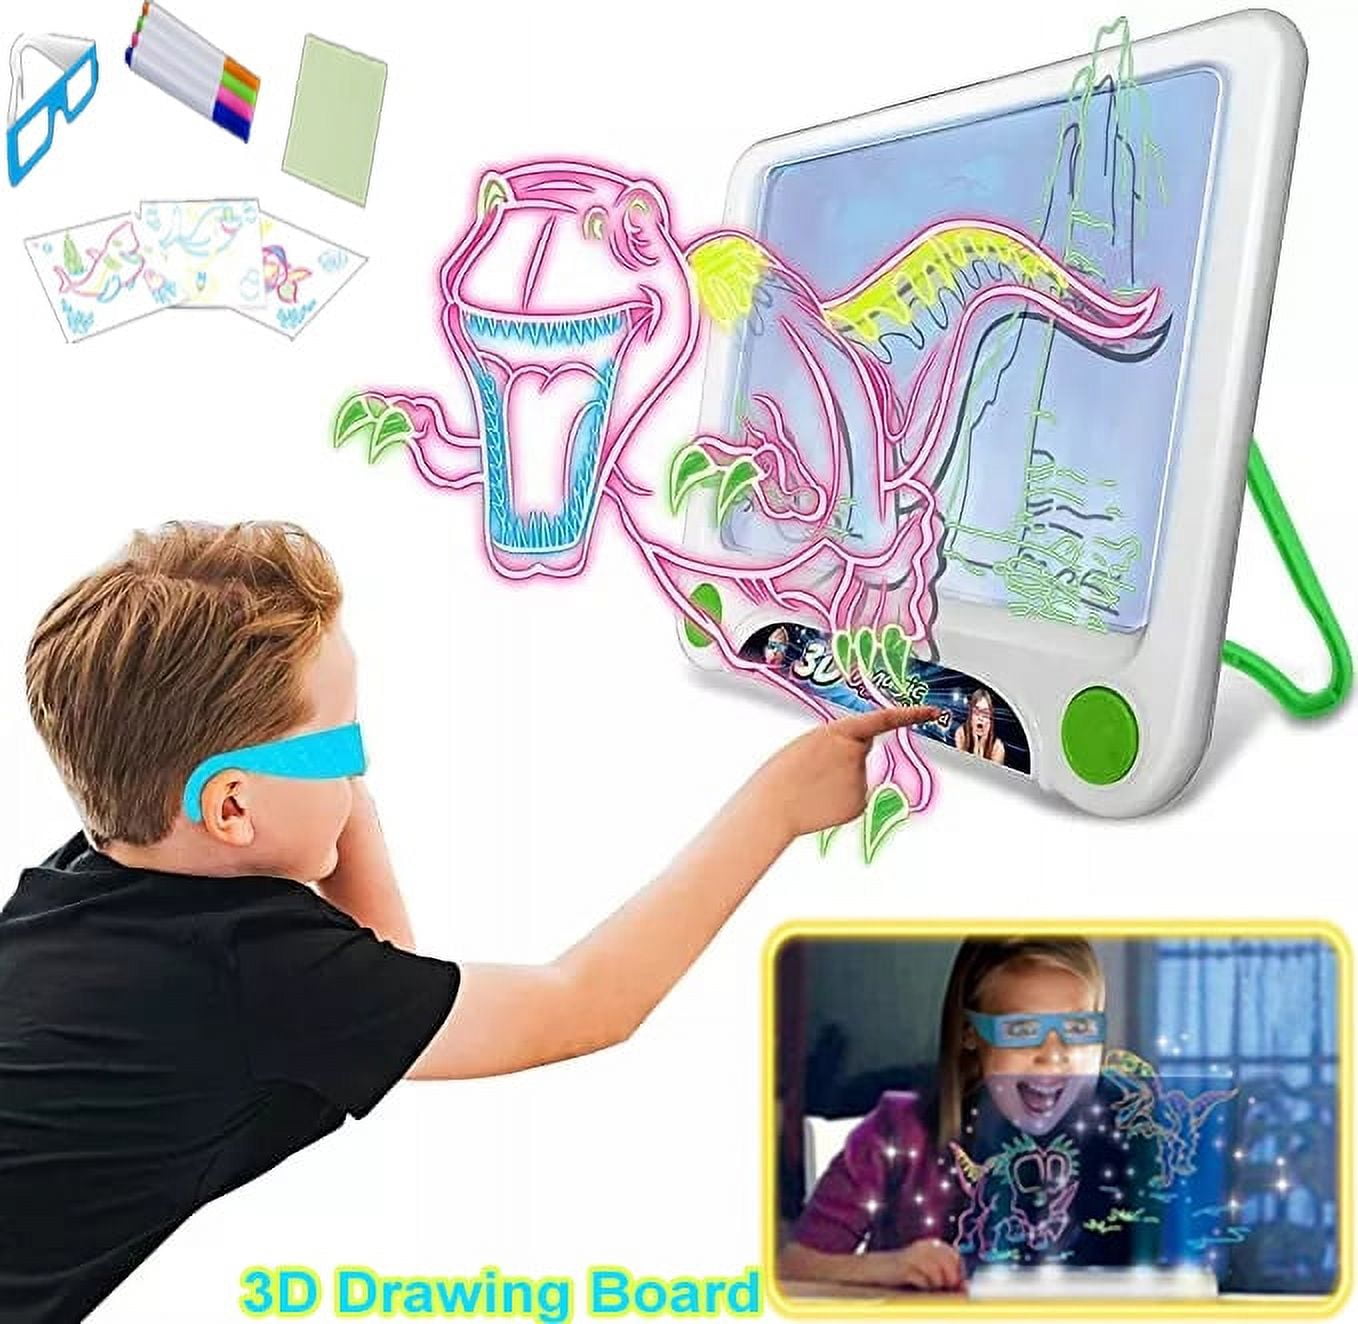 3D Drawing Board LED Graphic Drawing Tablet Portable Glow Board